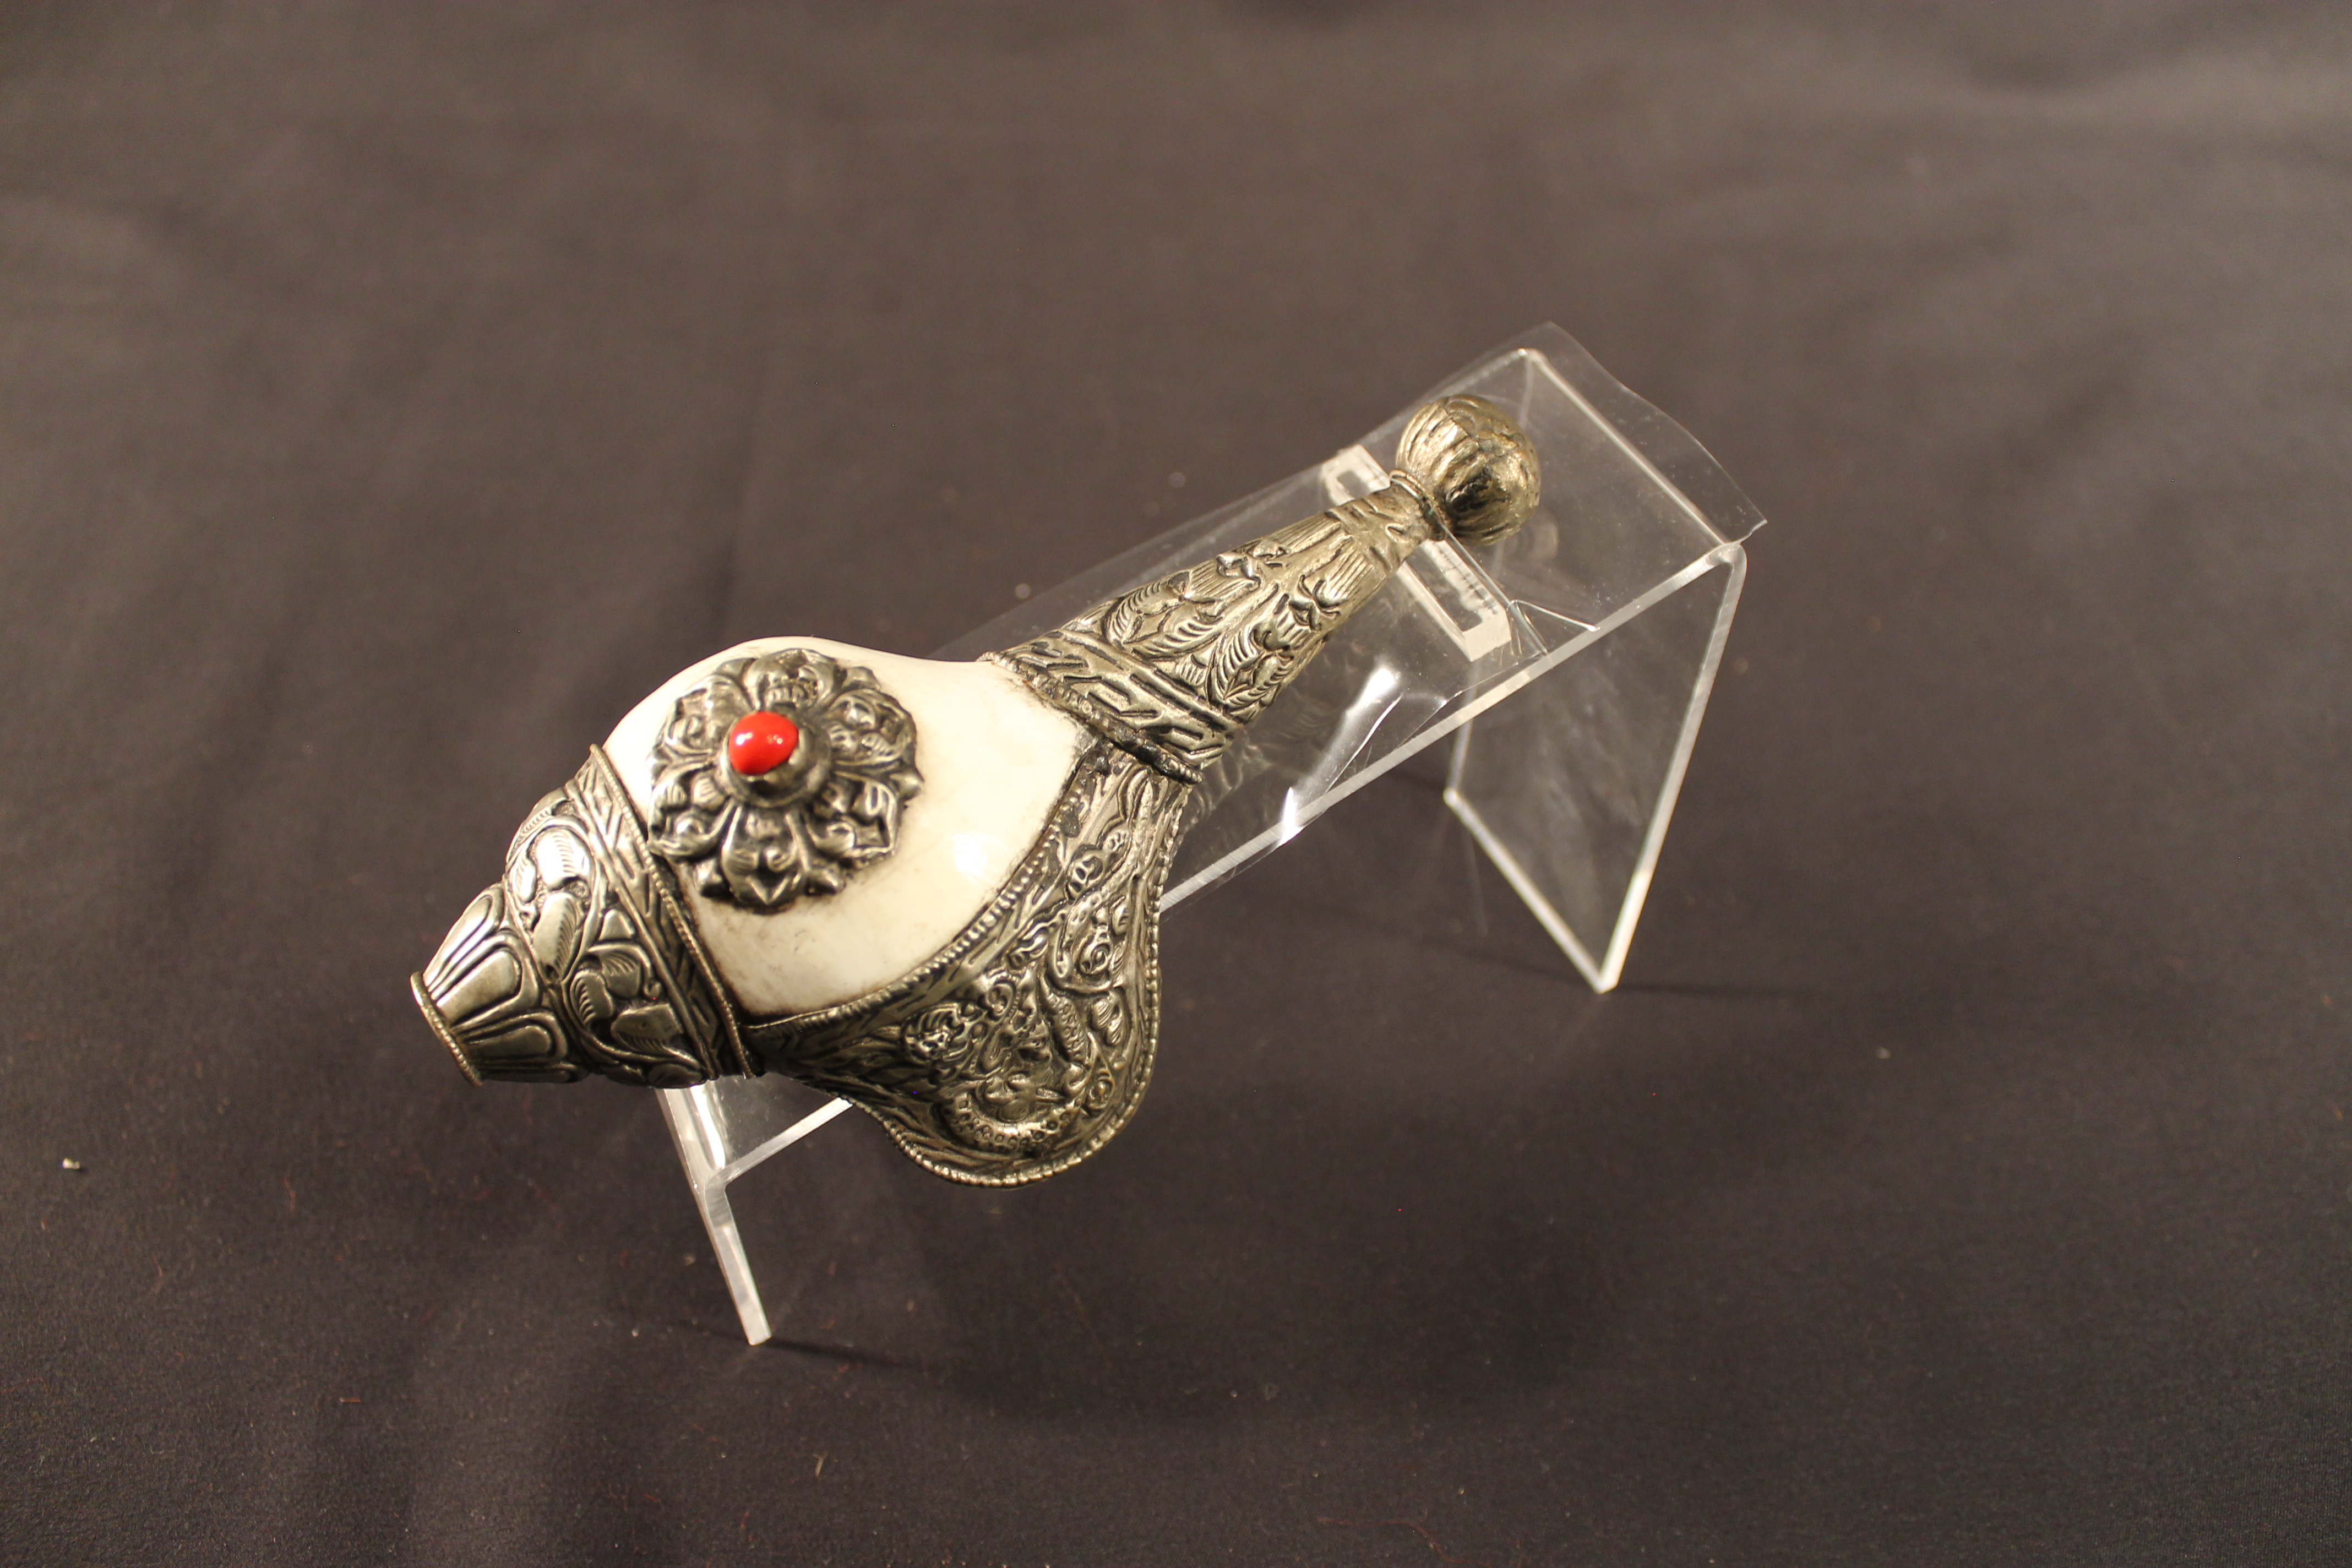 Horn is shell-shaped with a long silver handle with red stone on top.